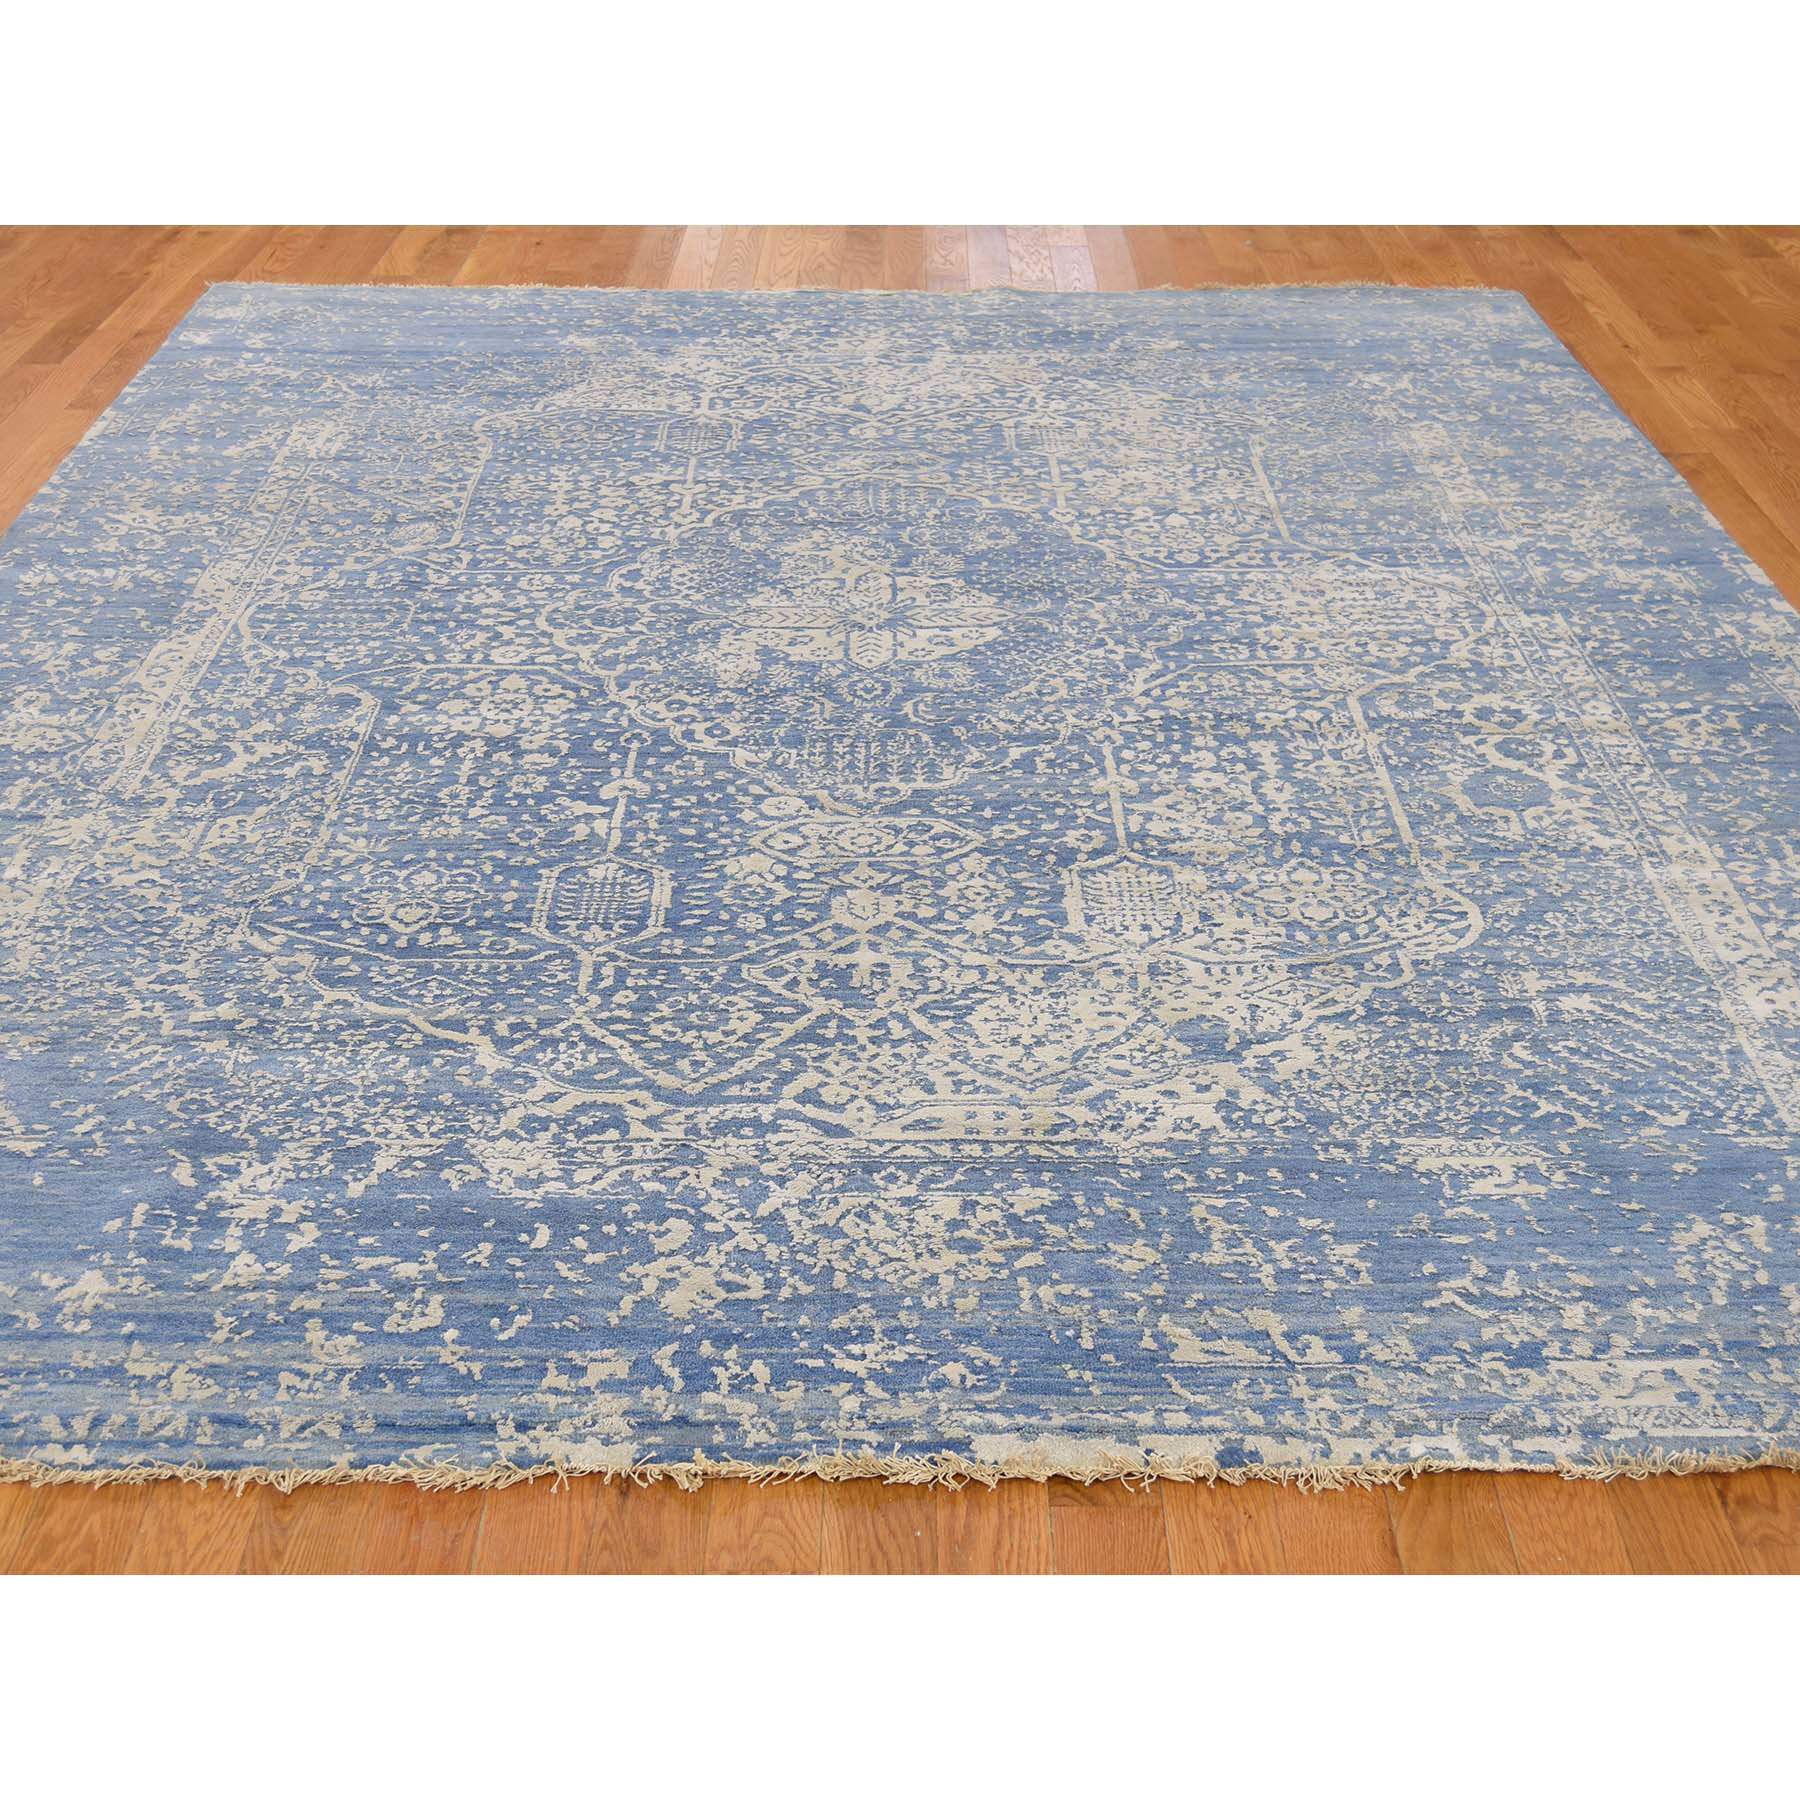 8-2--x10-1-- Wool and Pure Silk Hand-Knotted Broken Persian Design Rug 